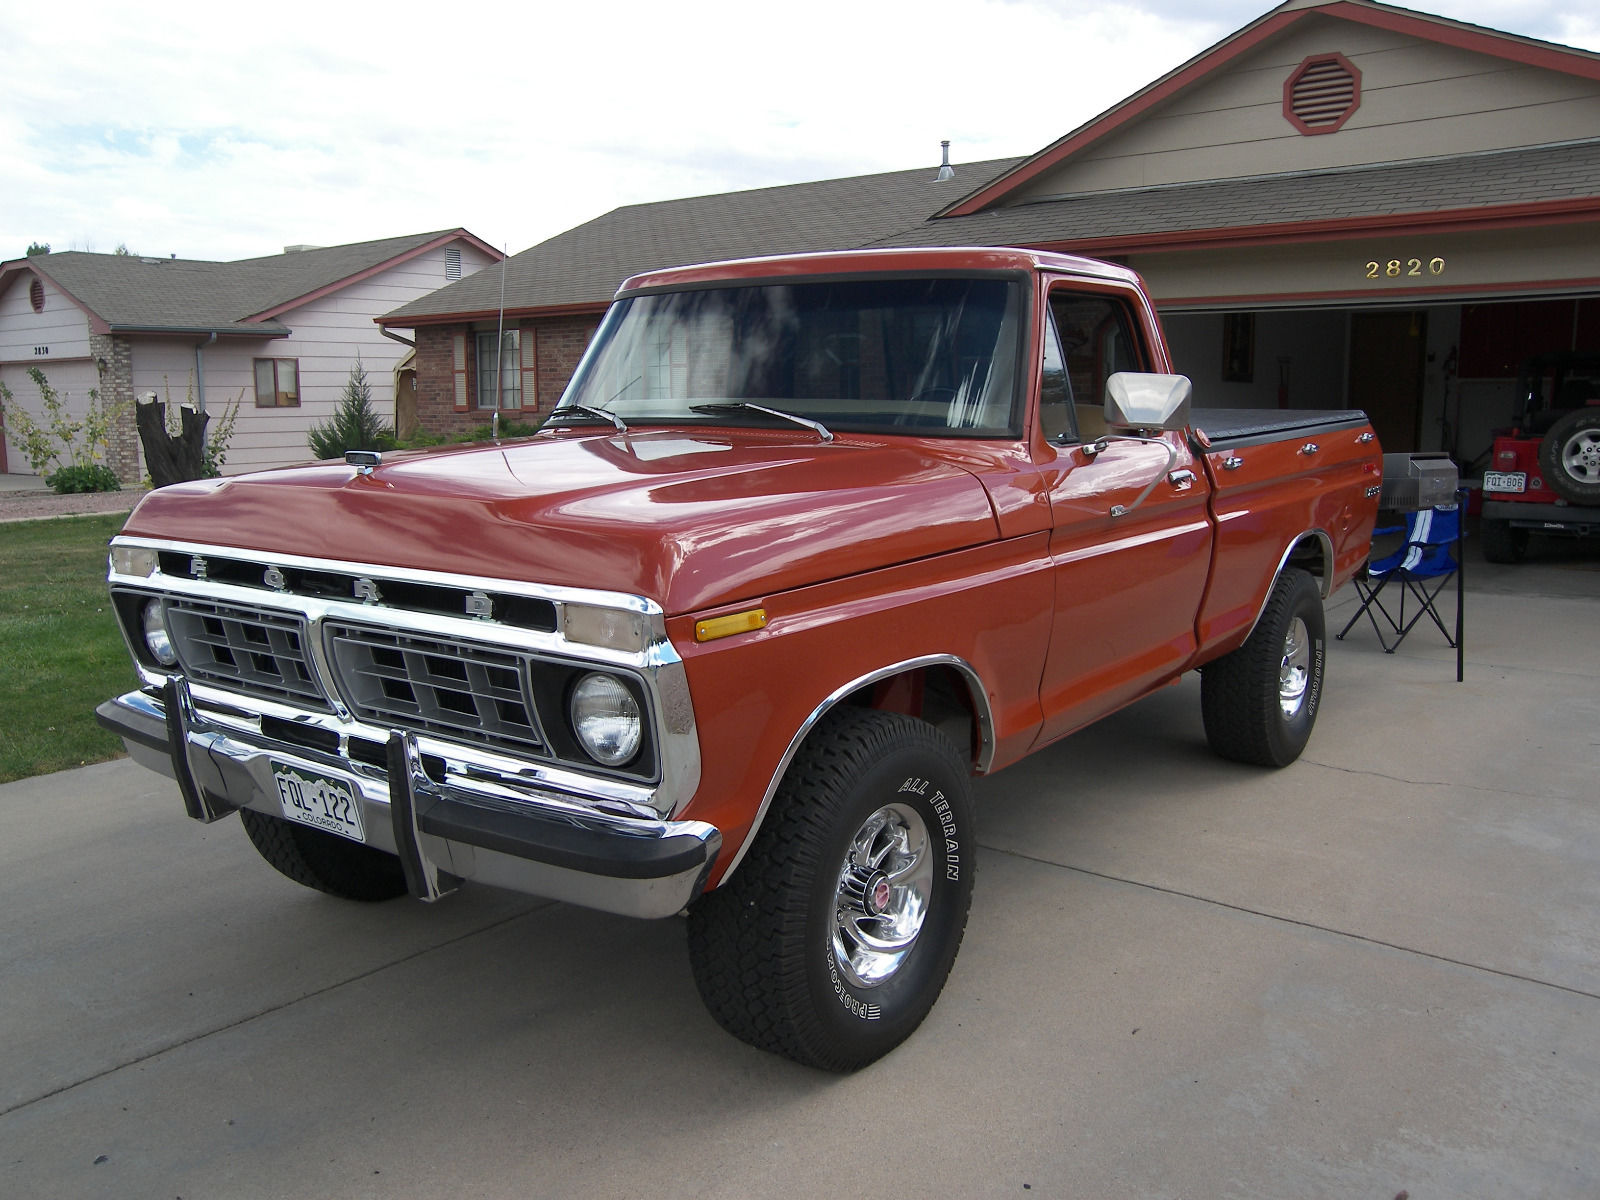 This 1976 Ford F100 is a Tailgater\u002639;s Dream  FordTrucks.com